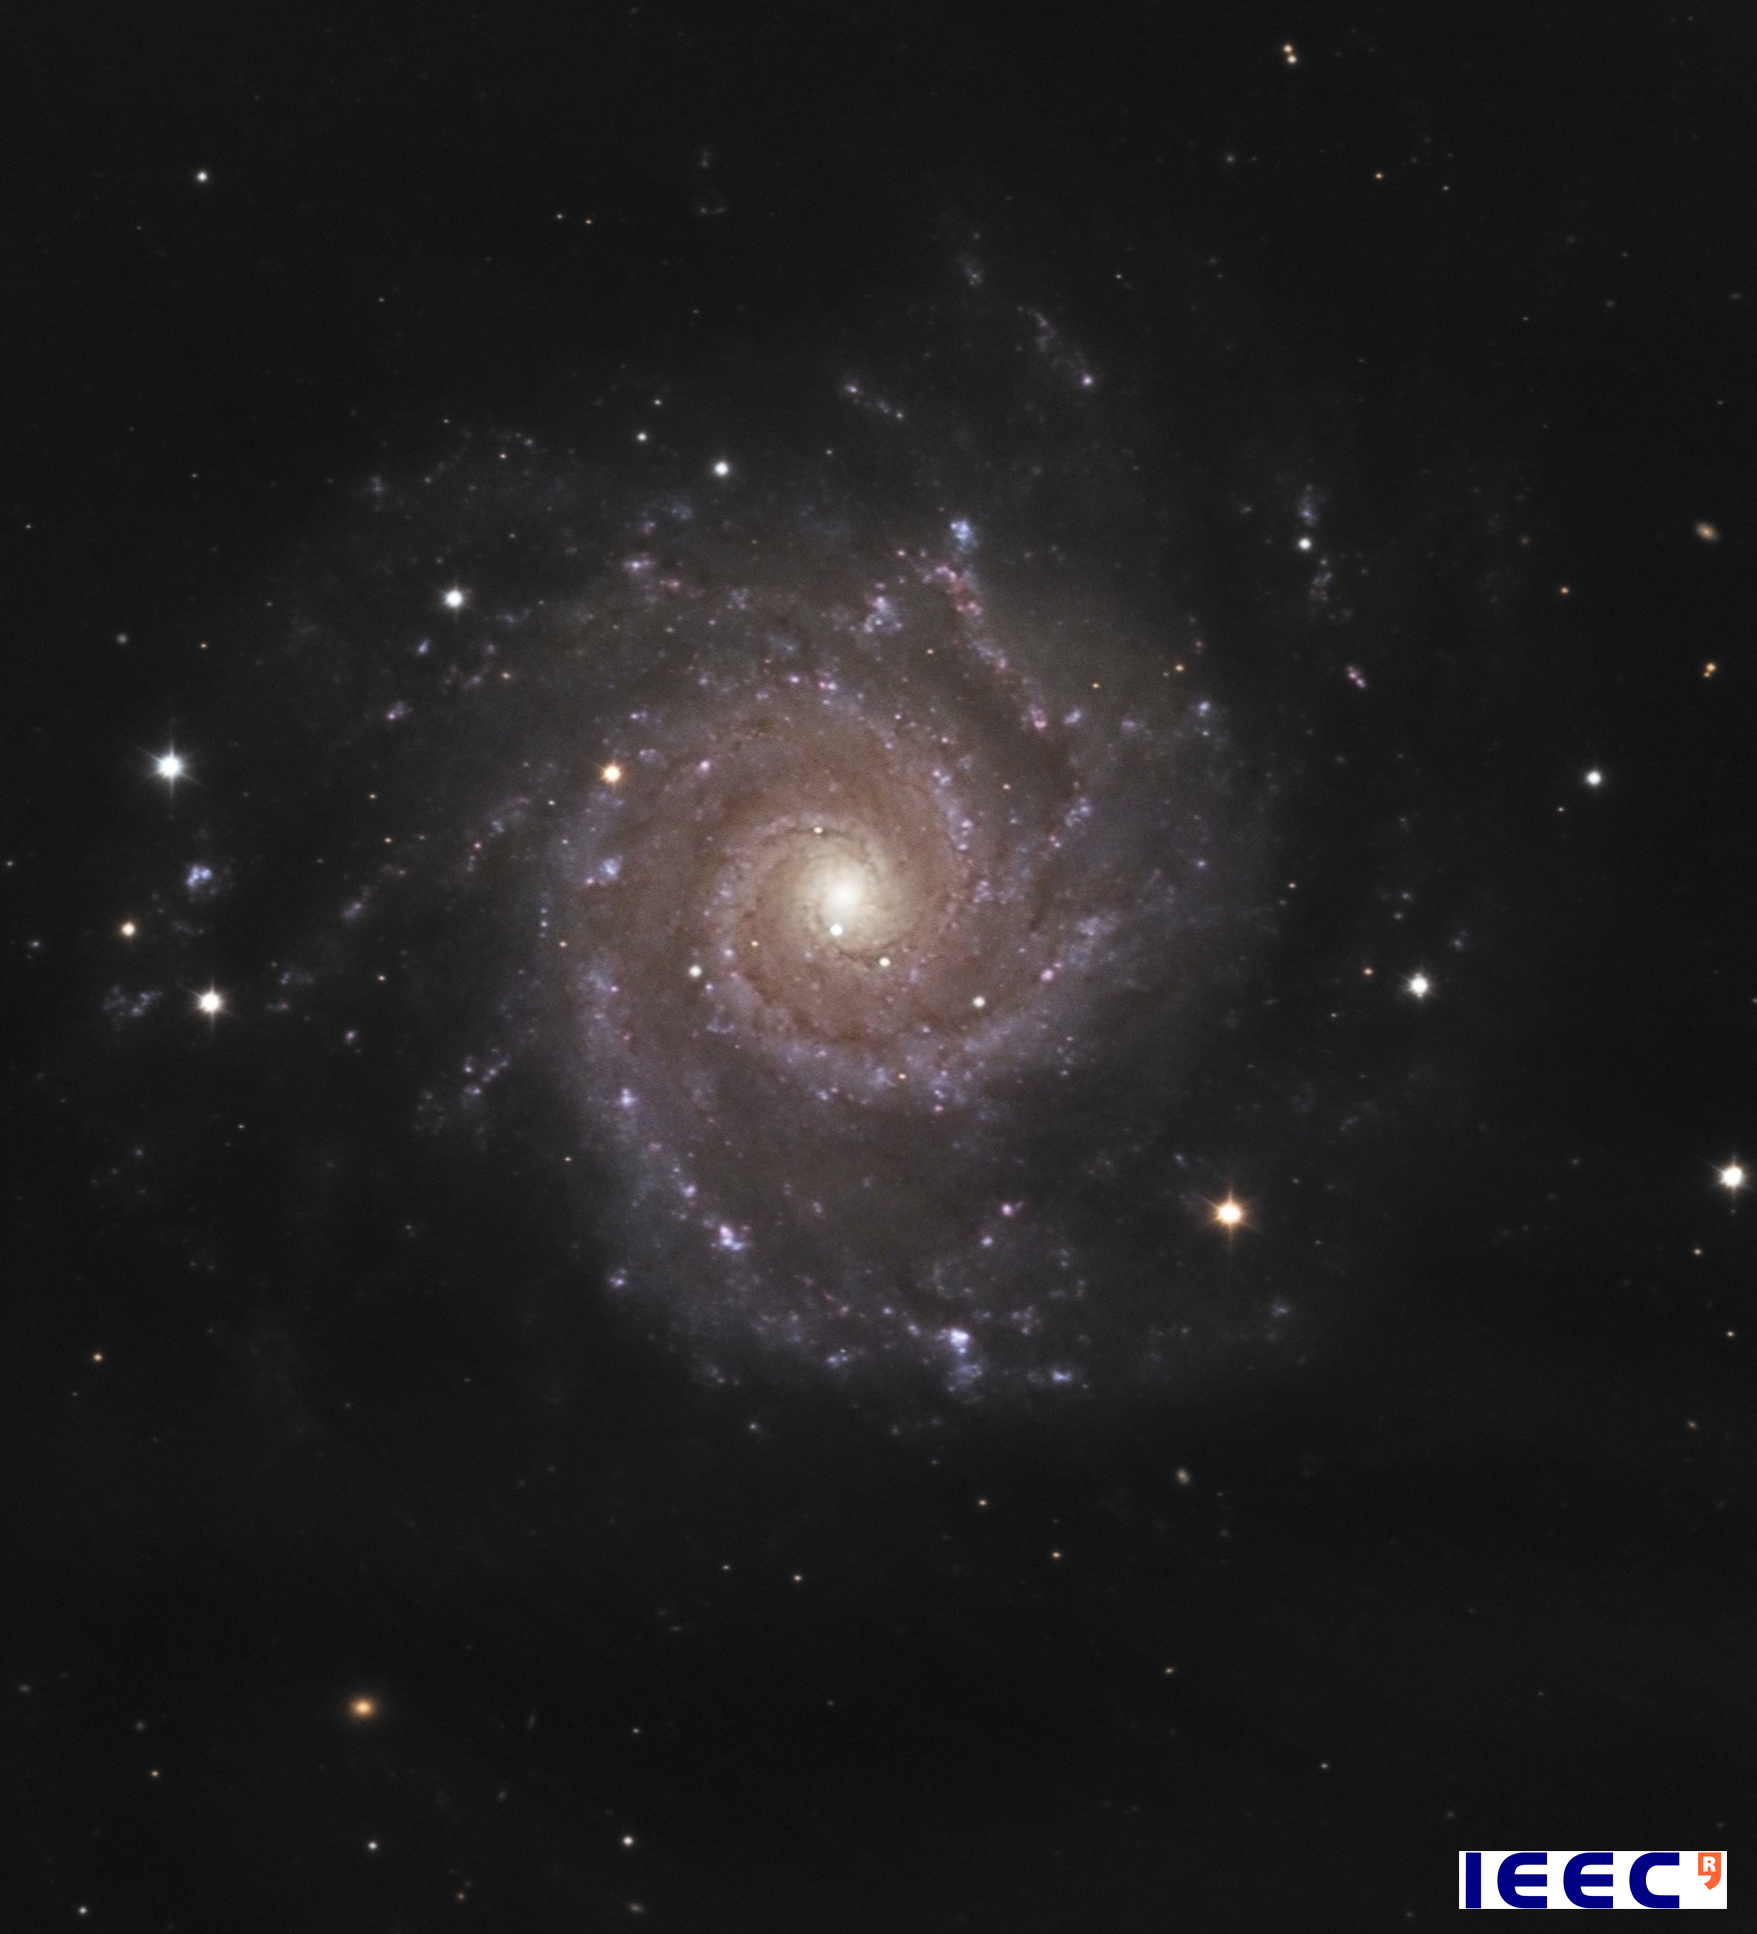 The spiral galaxy M74, picture of September of the Observatori Asrtronòmic del Montsec